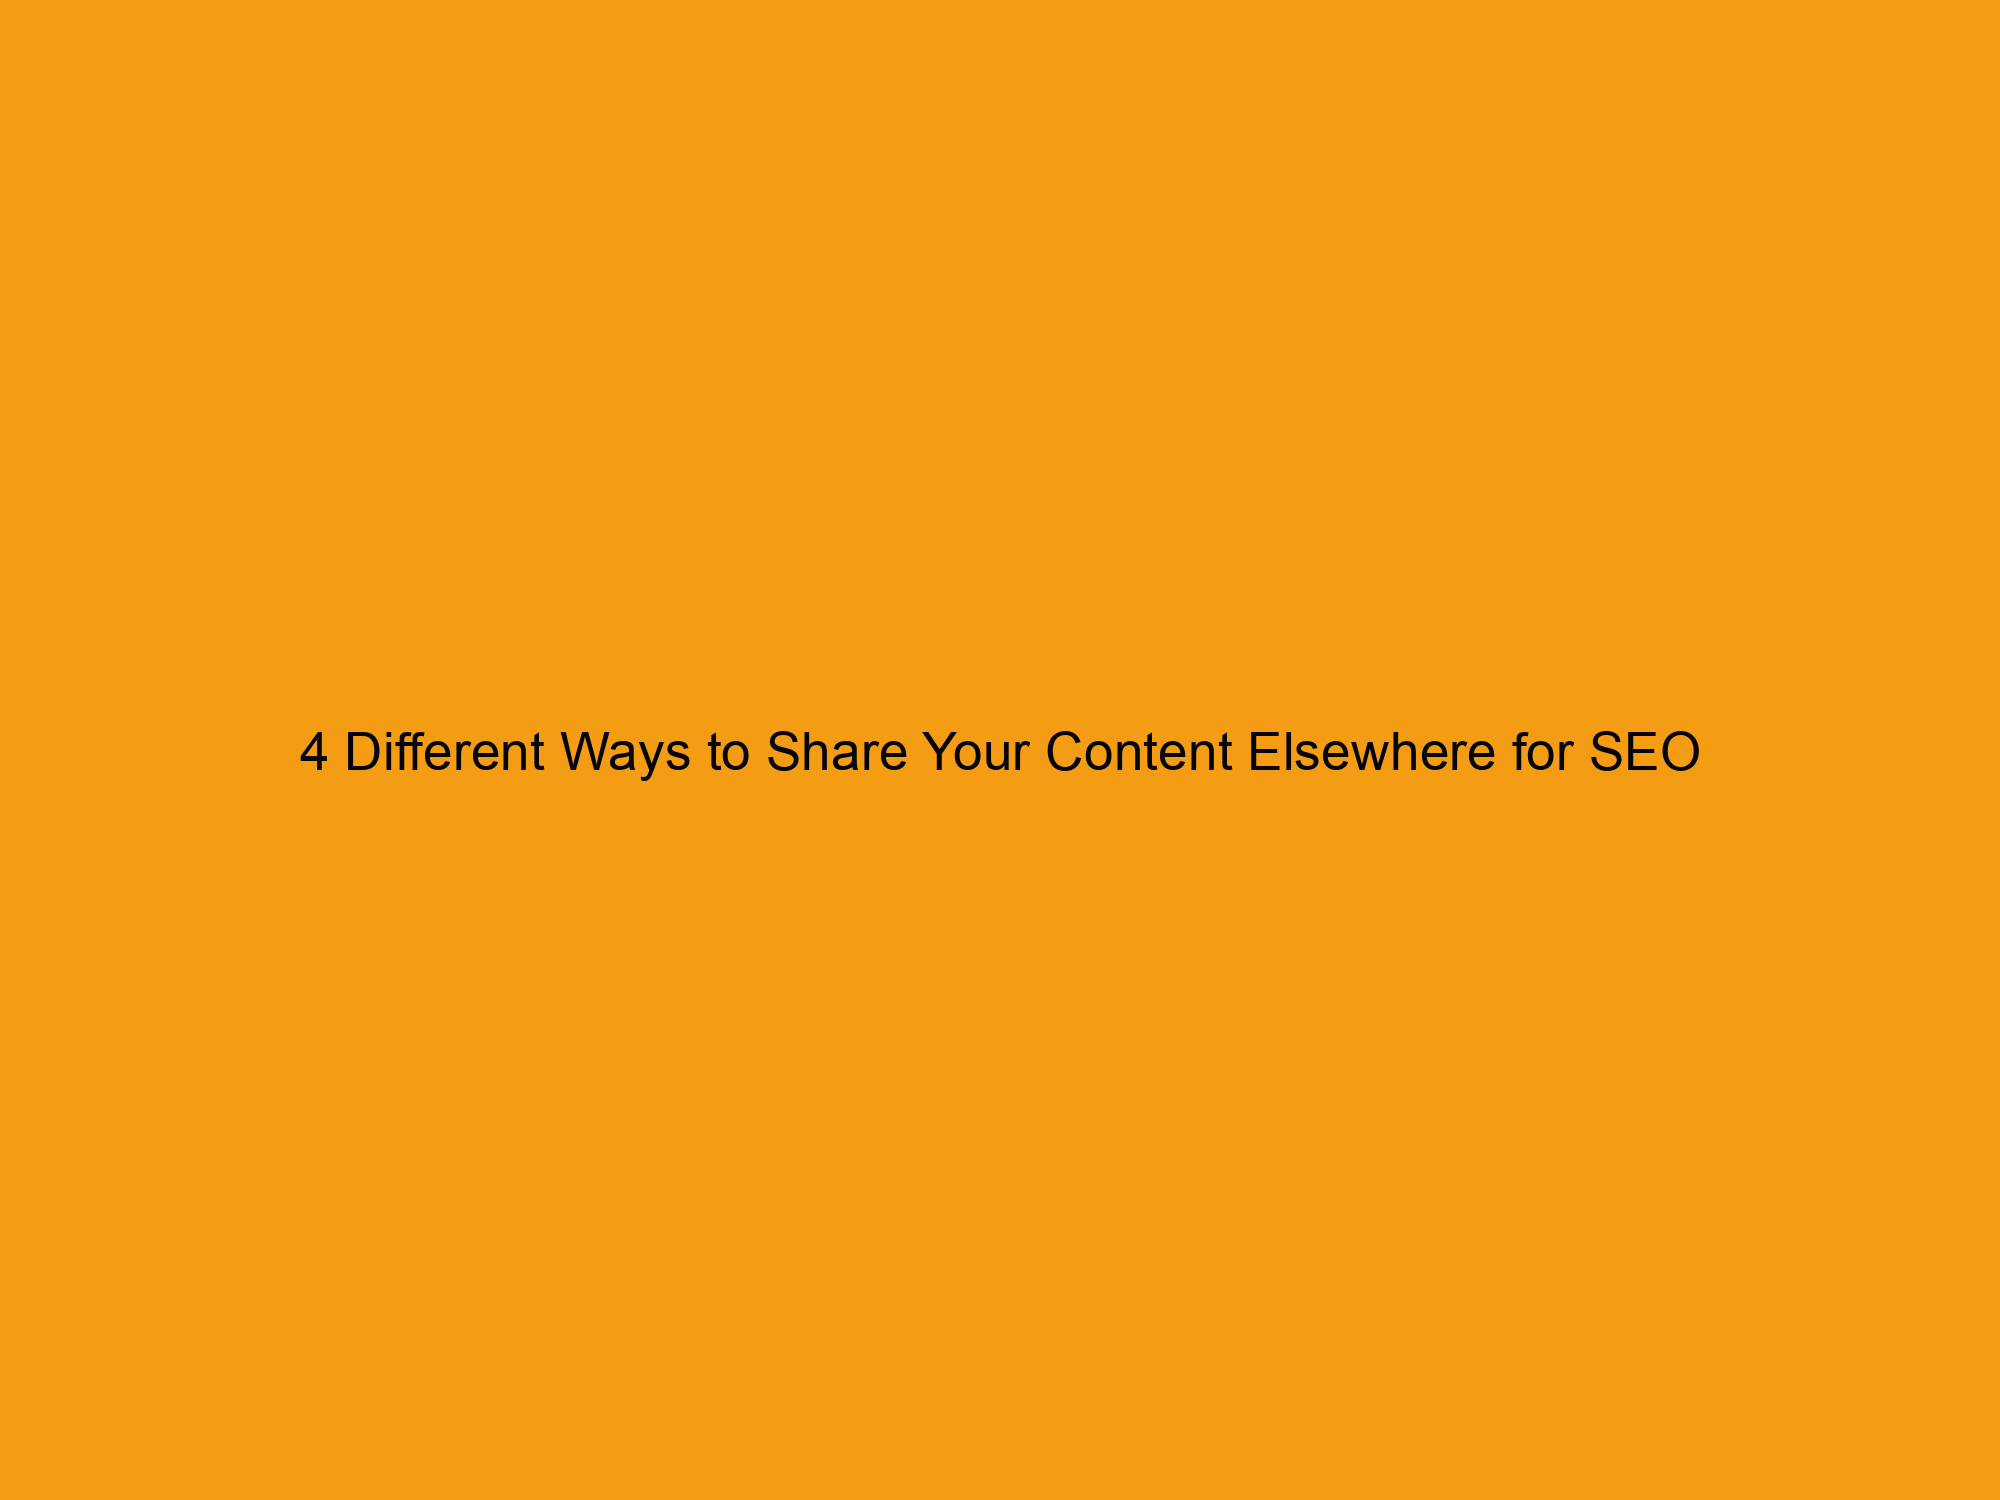 4 Different Ways to Share Your Content Elsewhere for SEO